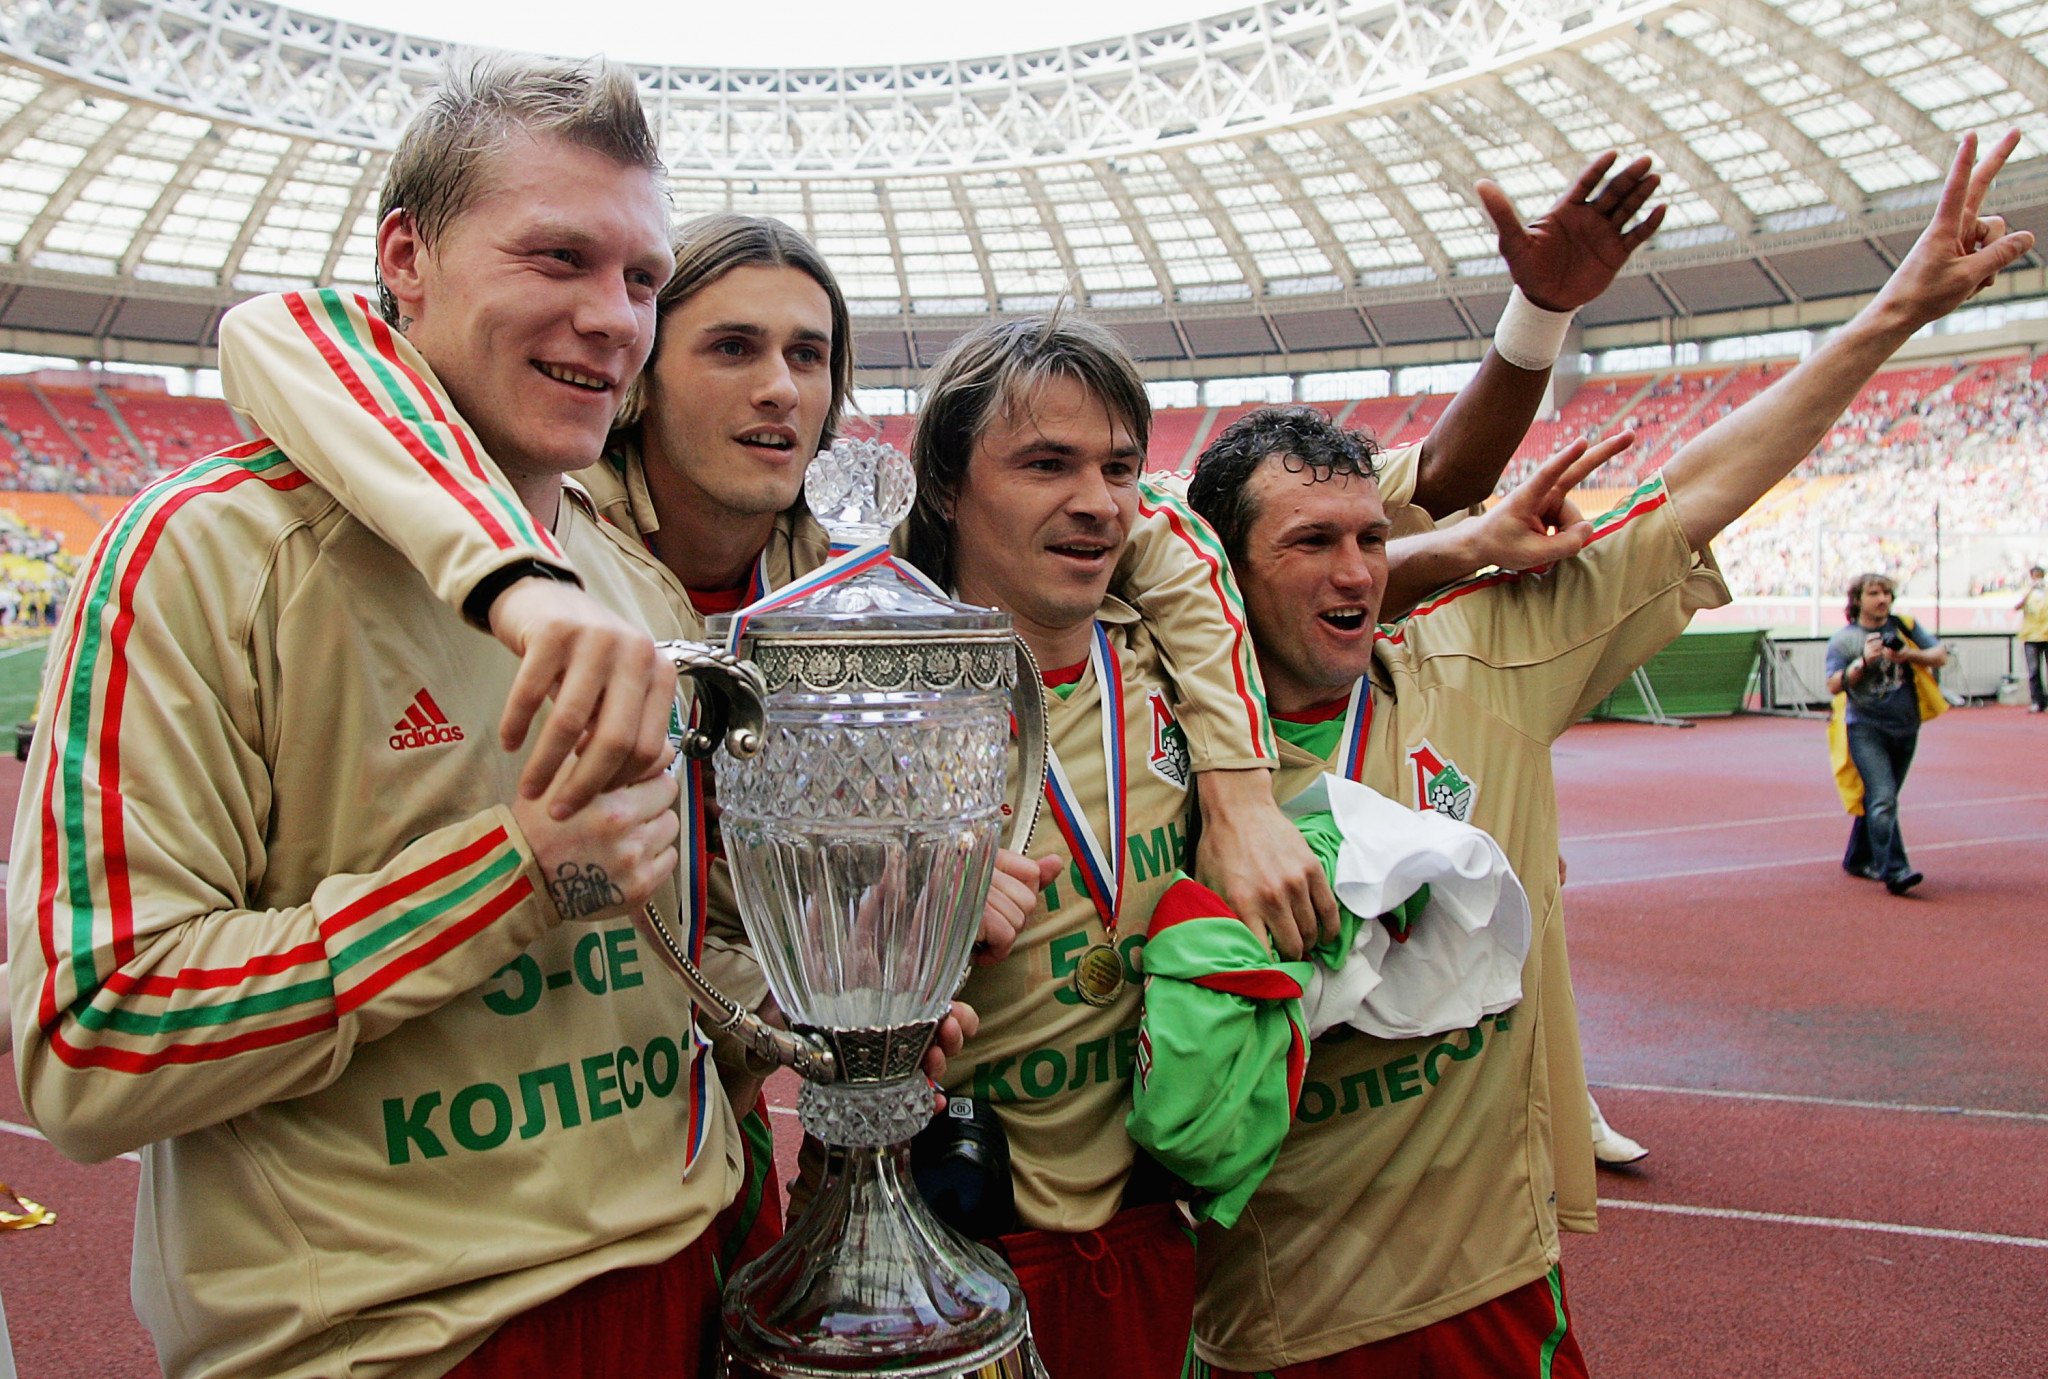 Garry O'Connor, left, scored the winning goal as Lokomotiv Moscow lifted the Russian Cup in 2007 ©Getty Images